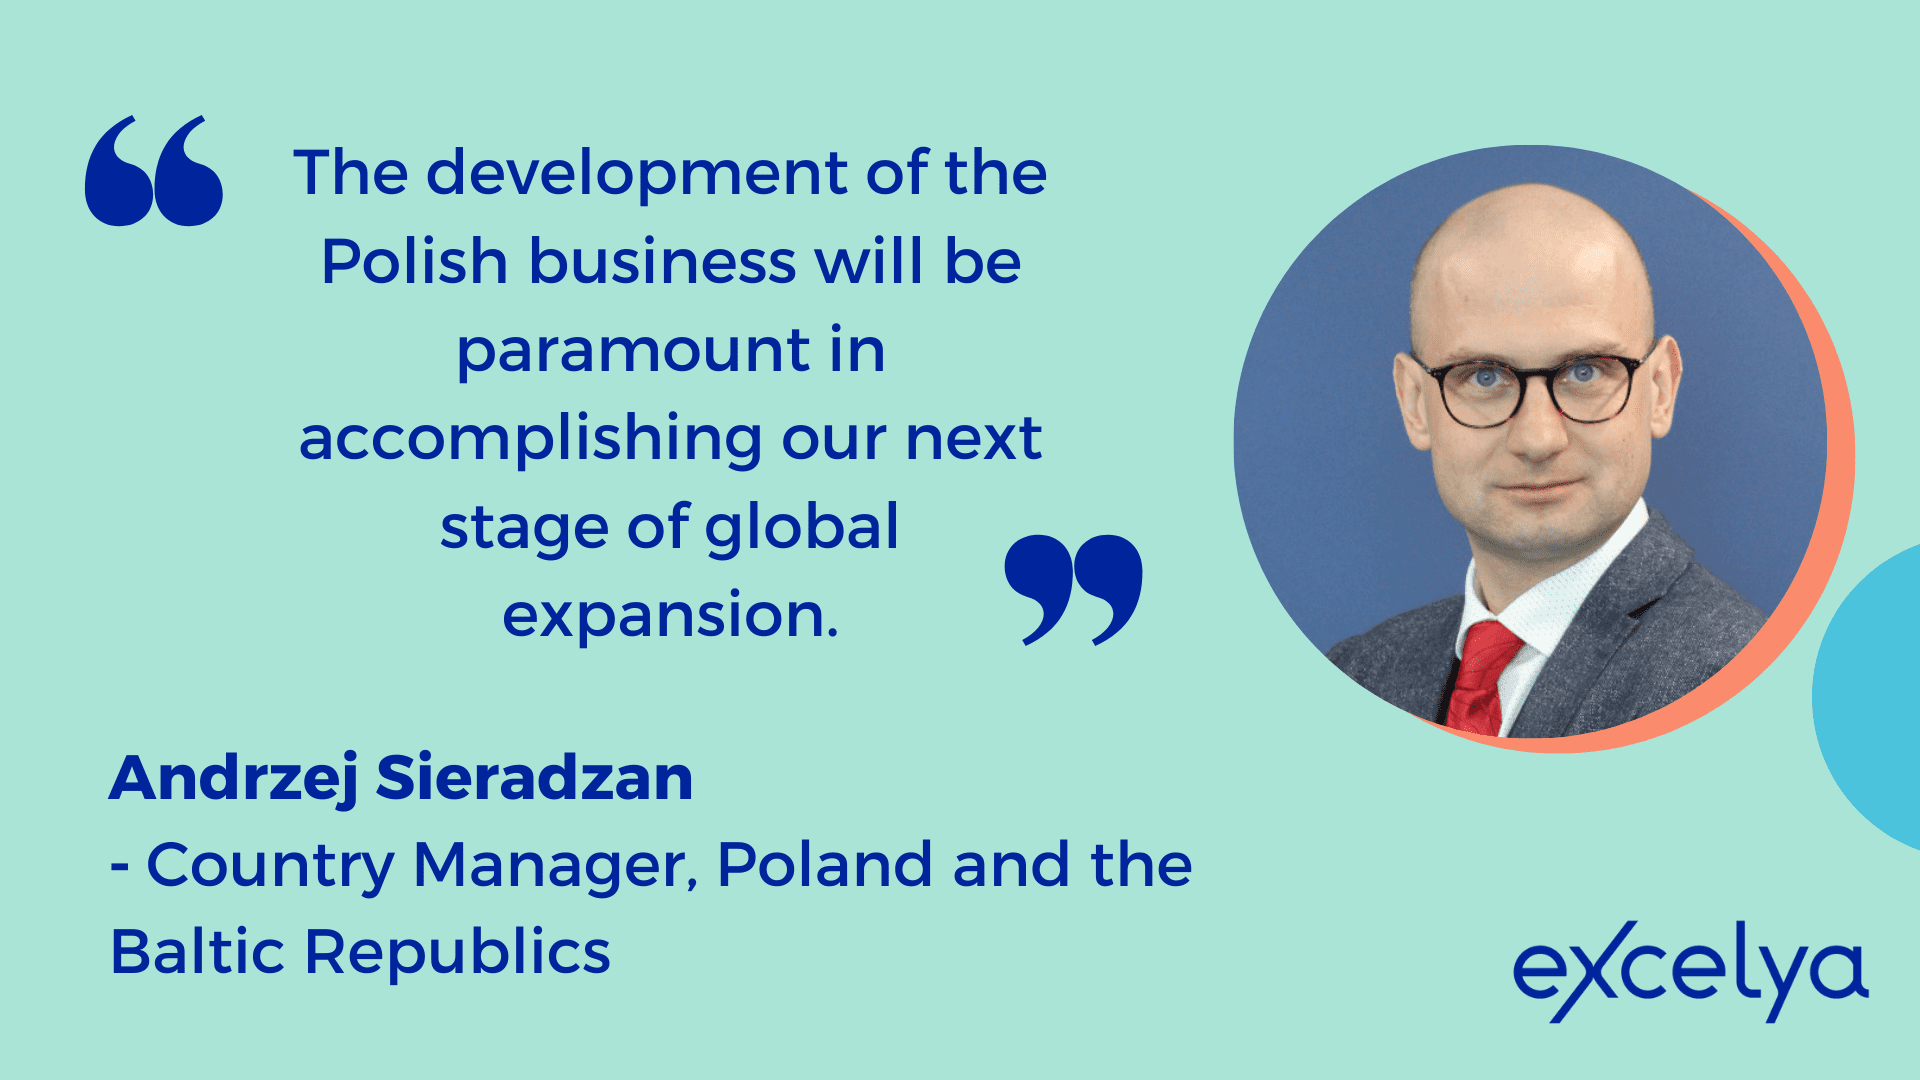 Andrzej Sieradzan - Country Manager, Poland and the Baltic Republics